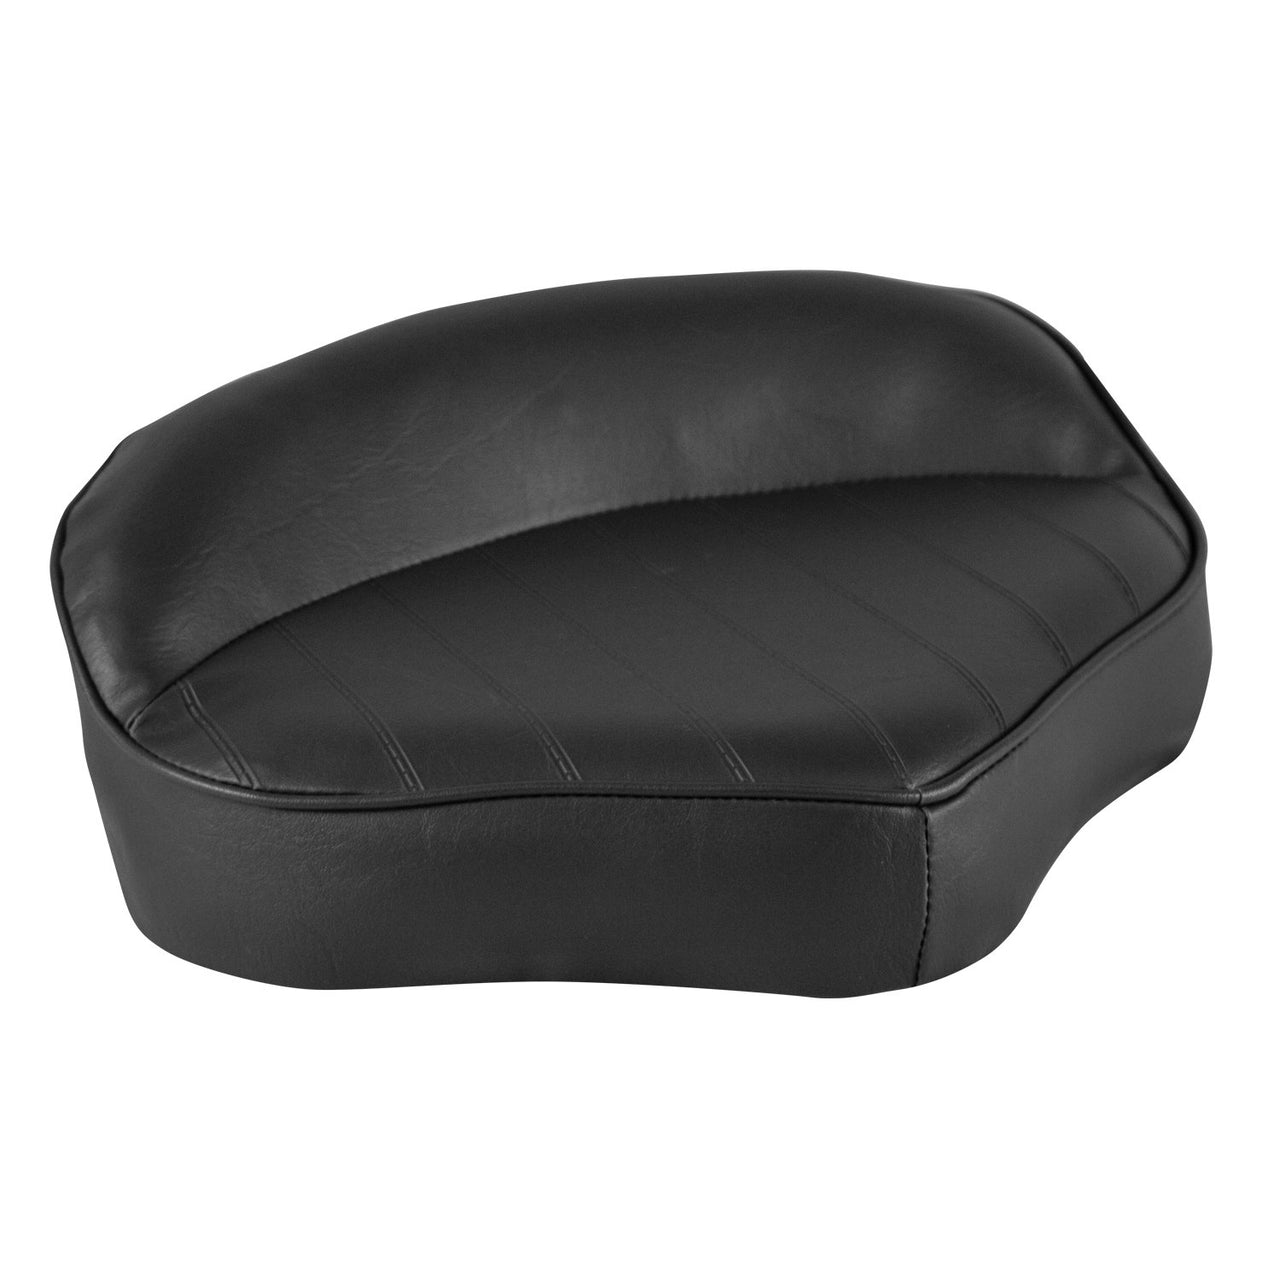 Wise Pro Butt Seat Charcoal 8WD112BP-720 | 24